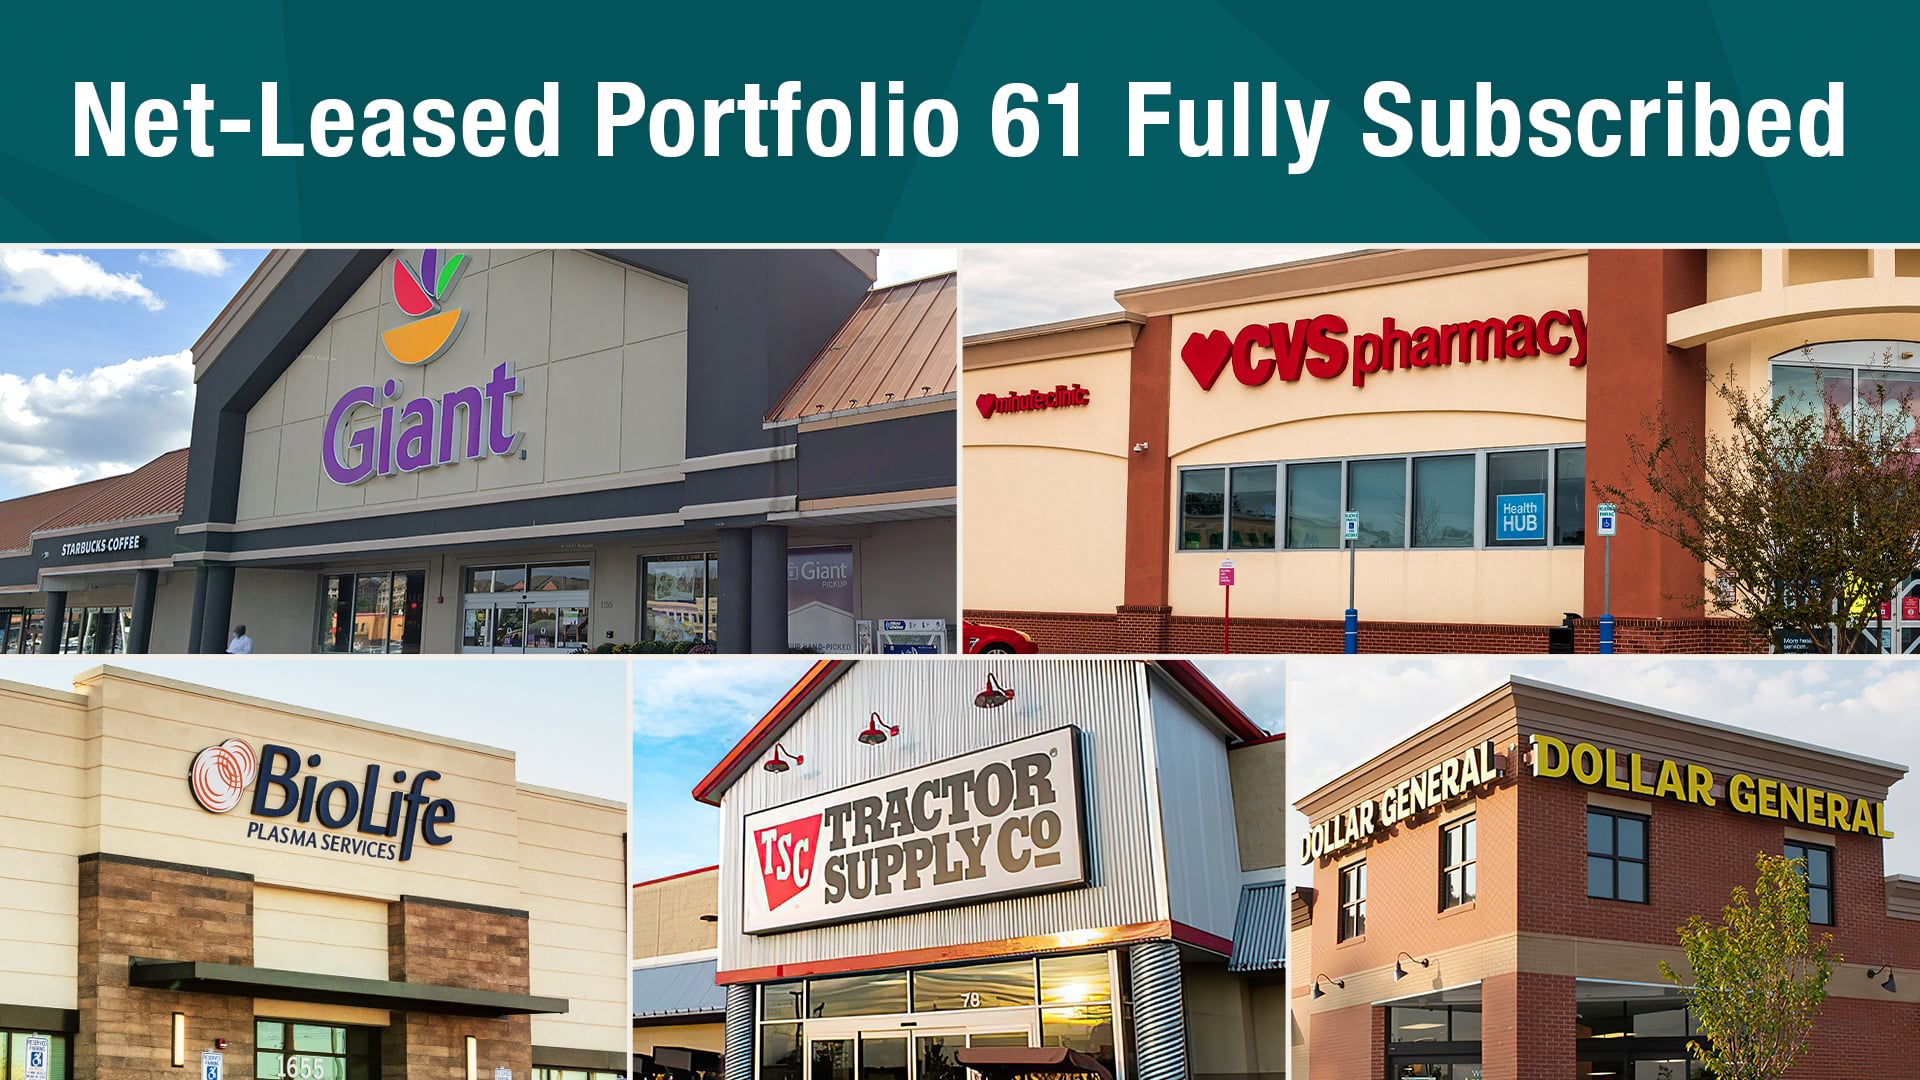 Net-Leased Portfolio 61 - Fully Subscribed